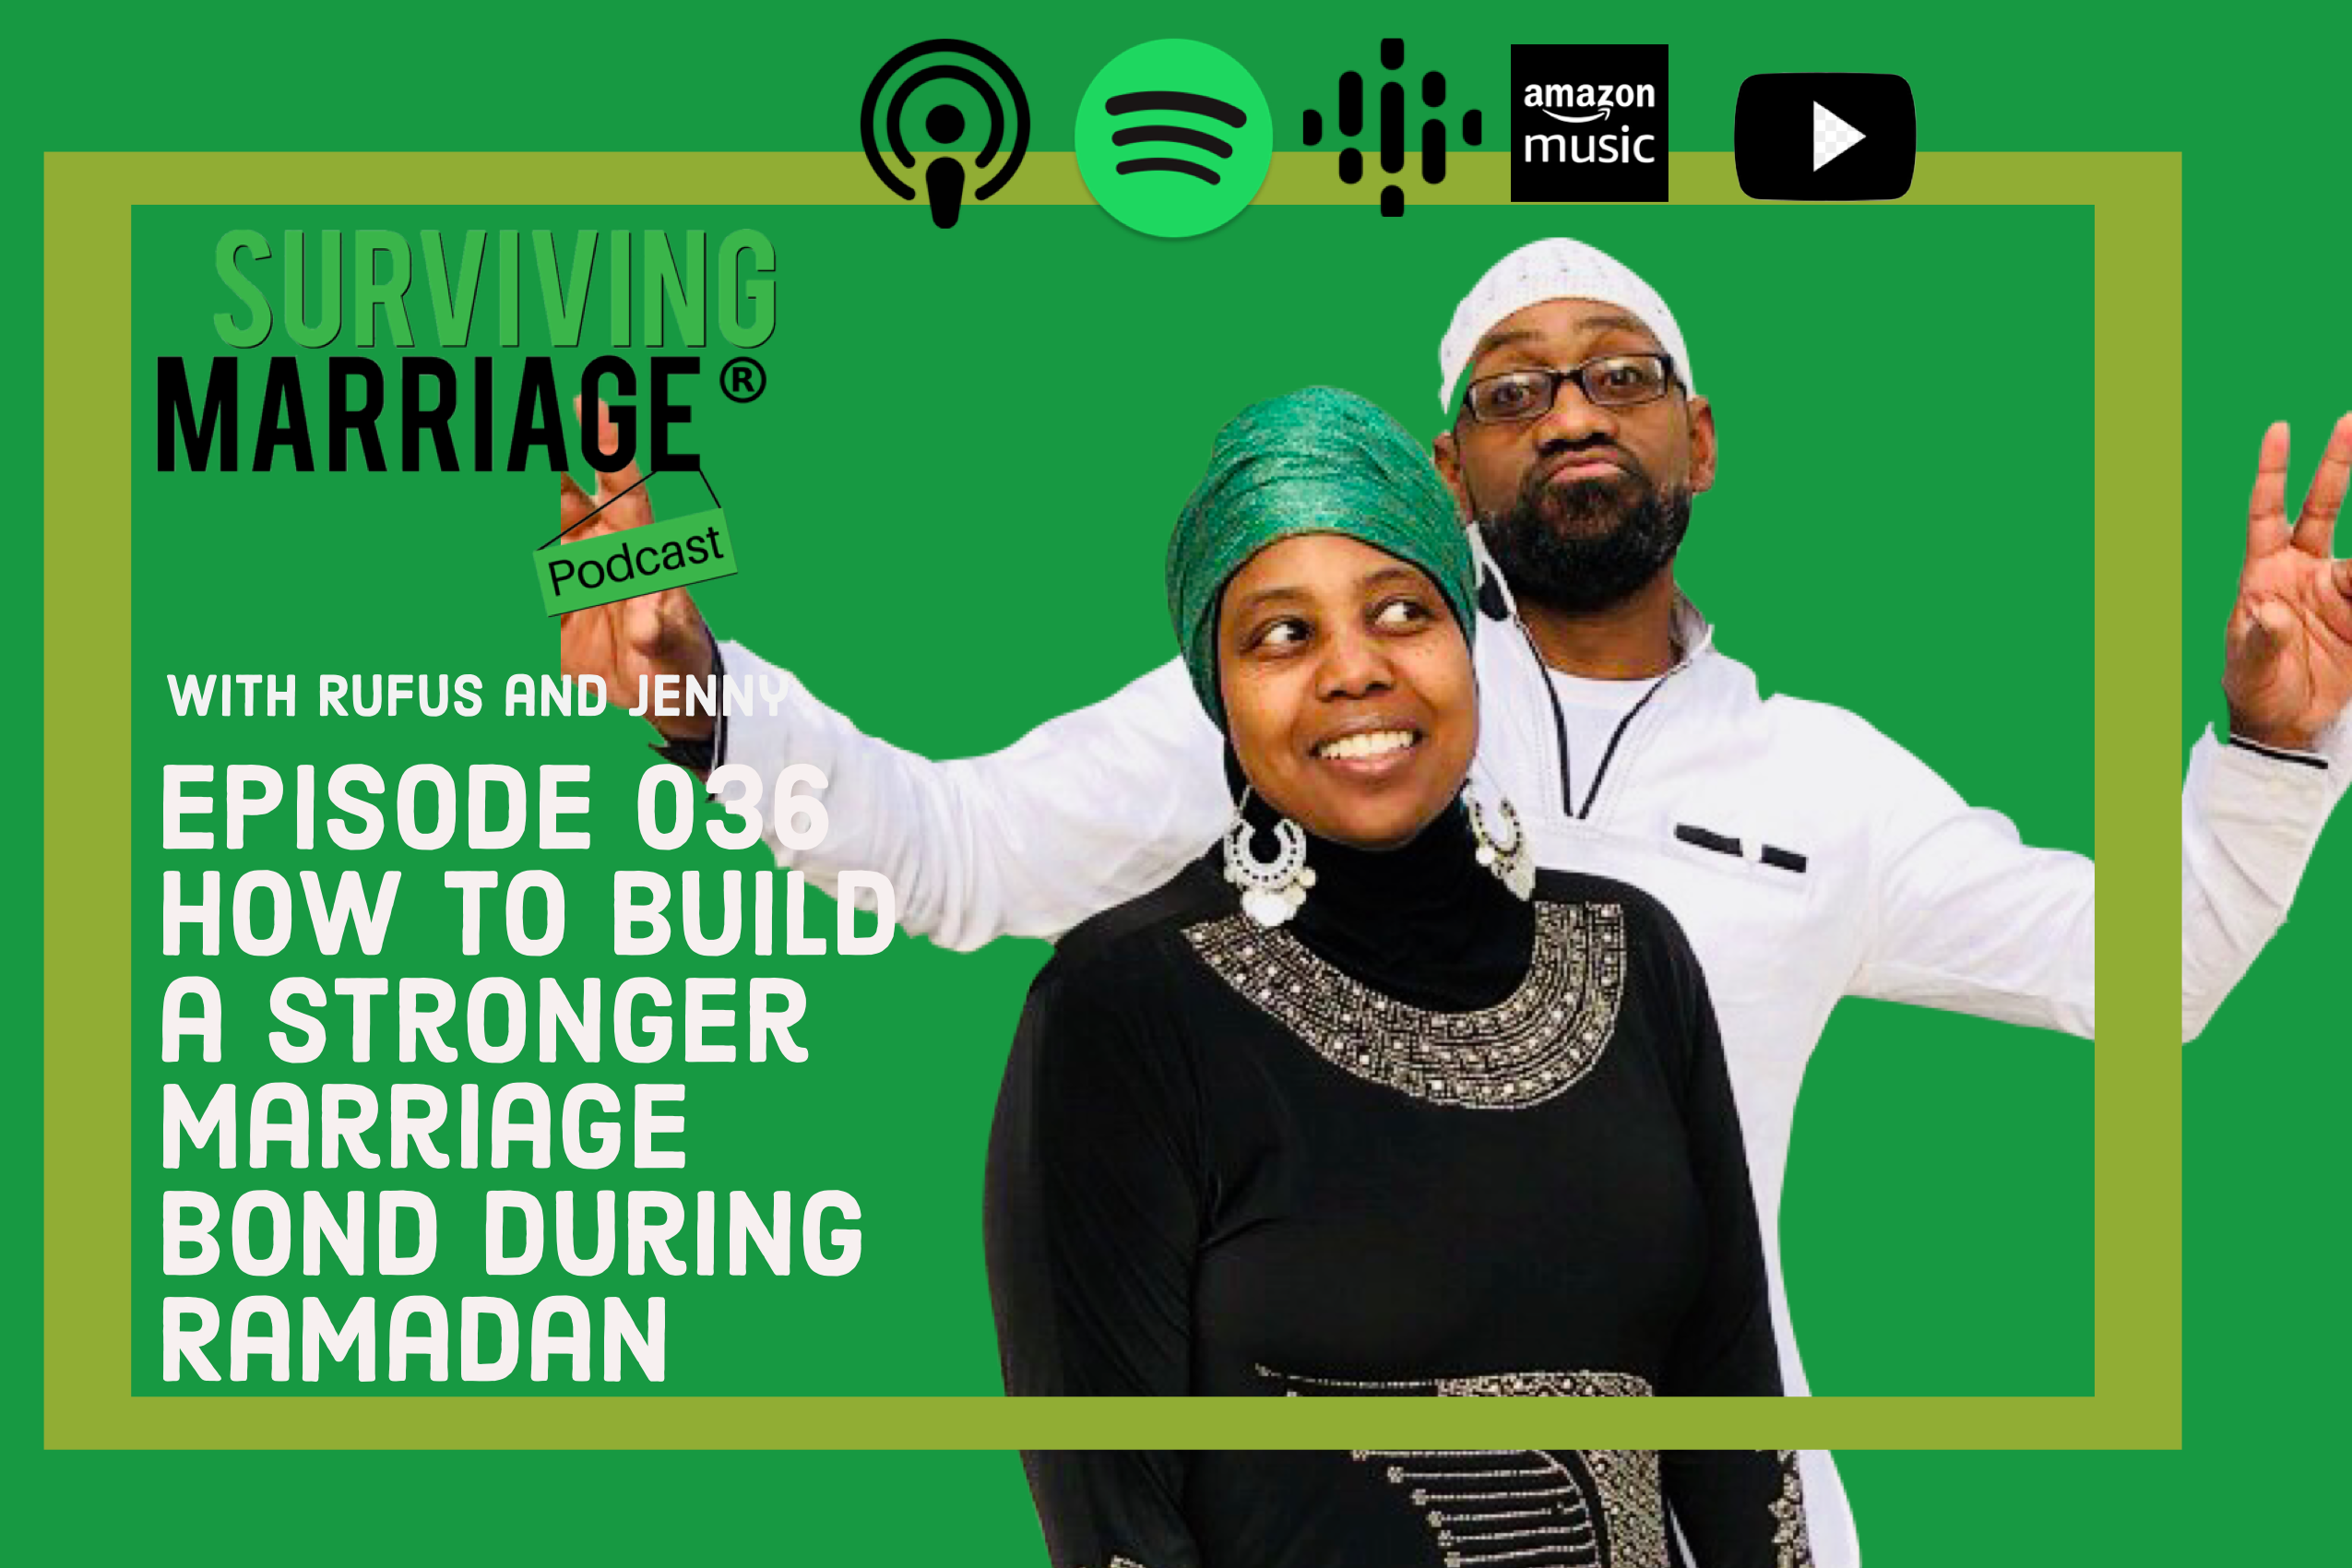 #SurvivingMarriage – How To Build A Stronger Marriage Bond During Ramadan